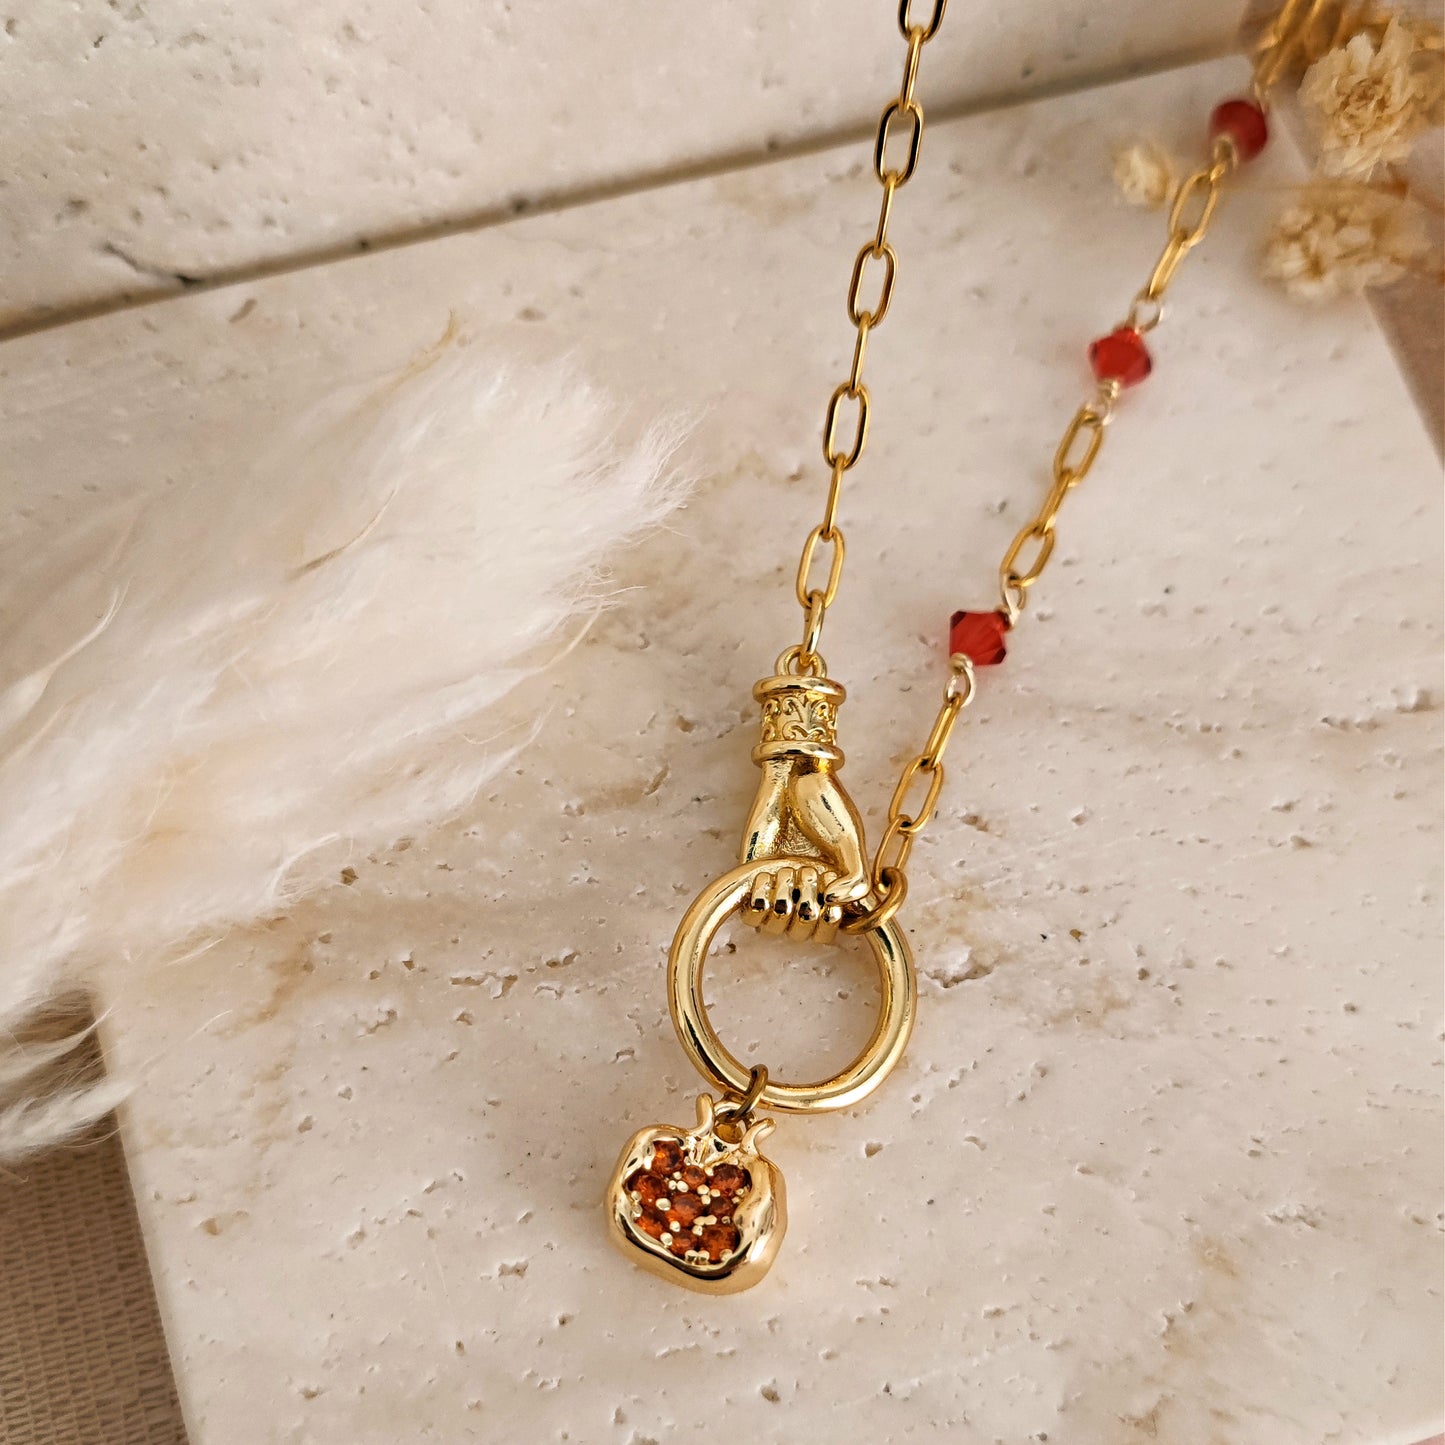 Persephone and Hades Pomegranate Necklace, gold